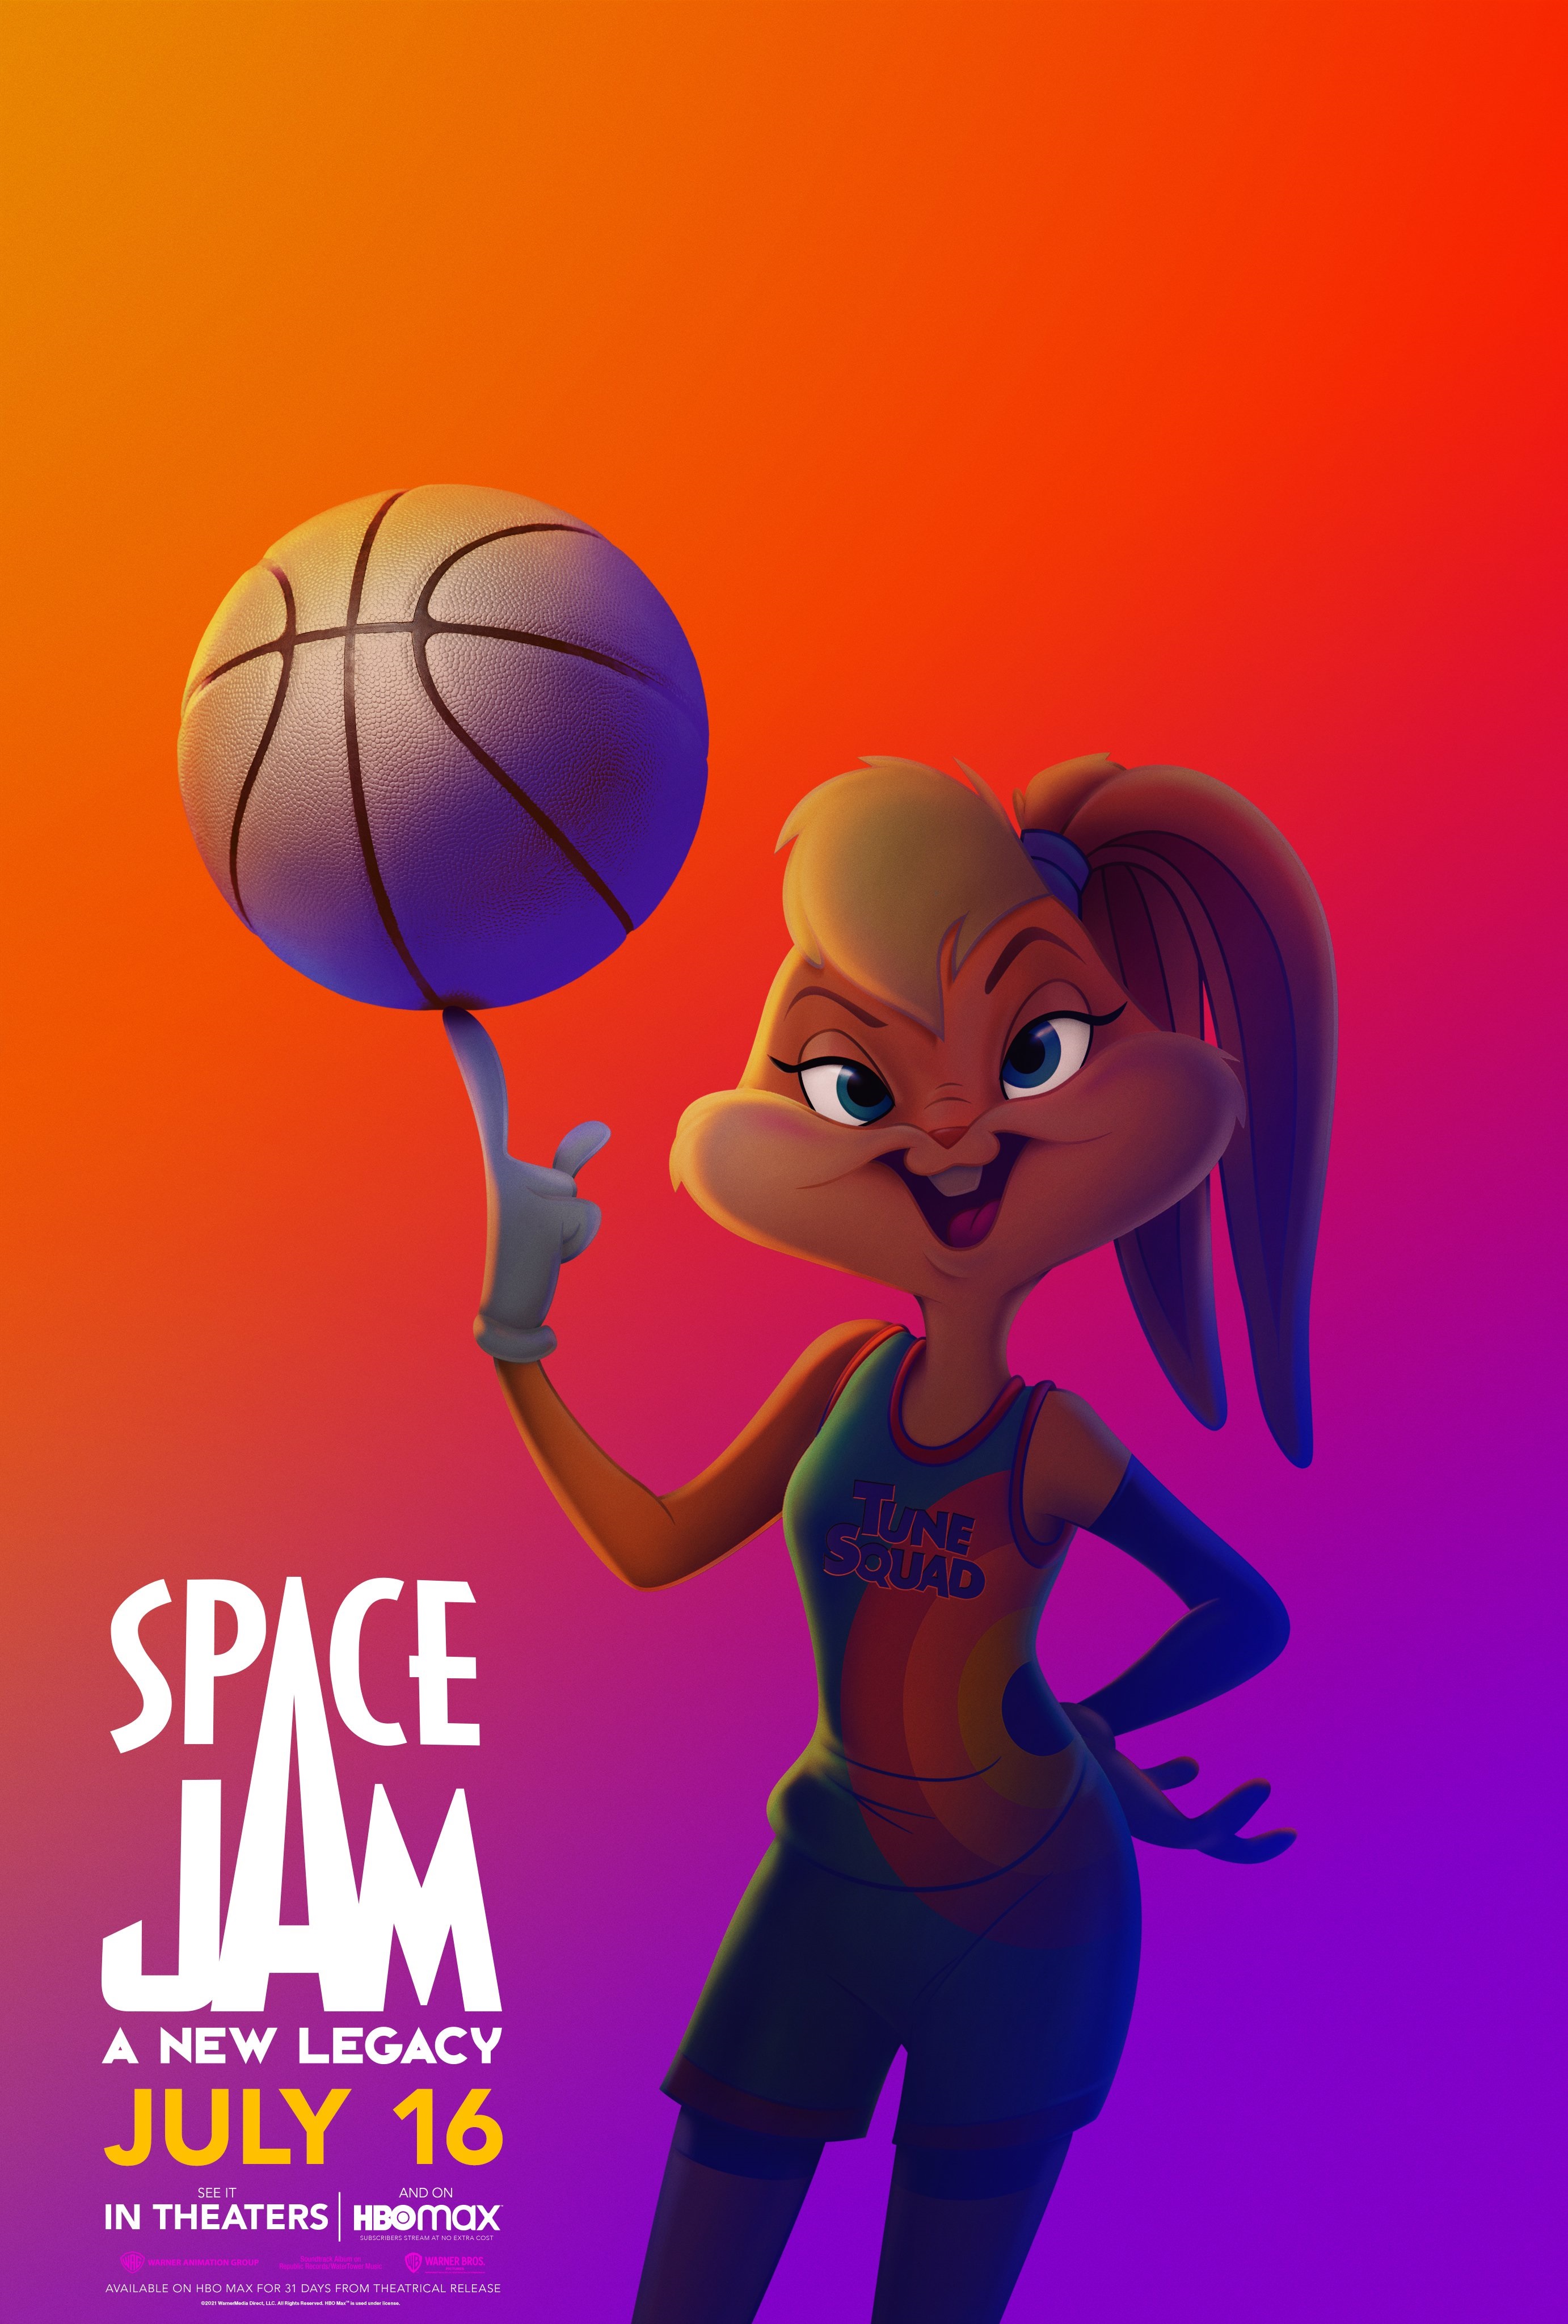 Space Jam A New Legacy Pics 13 Space Jam A New Legacy Poster By Bakikayaa On Deviantart